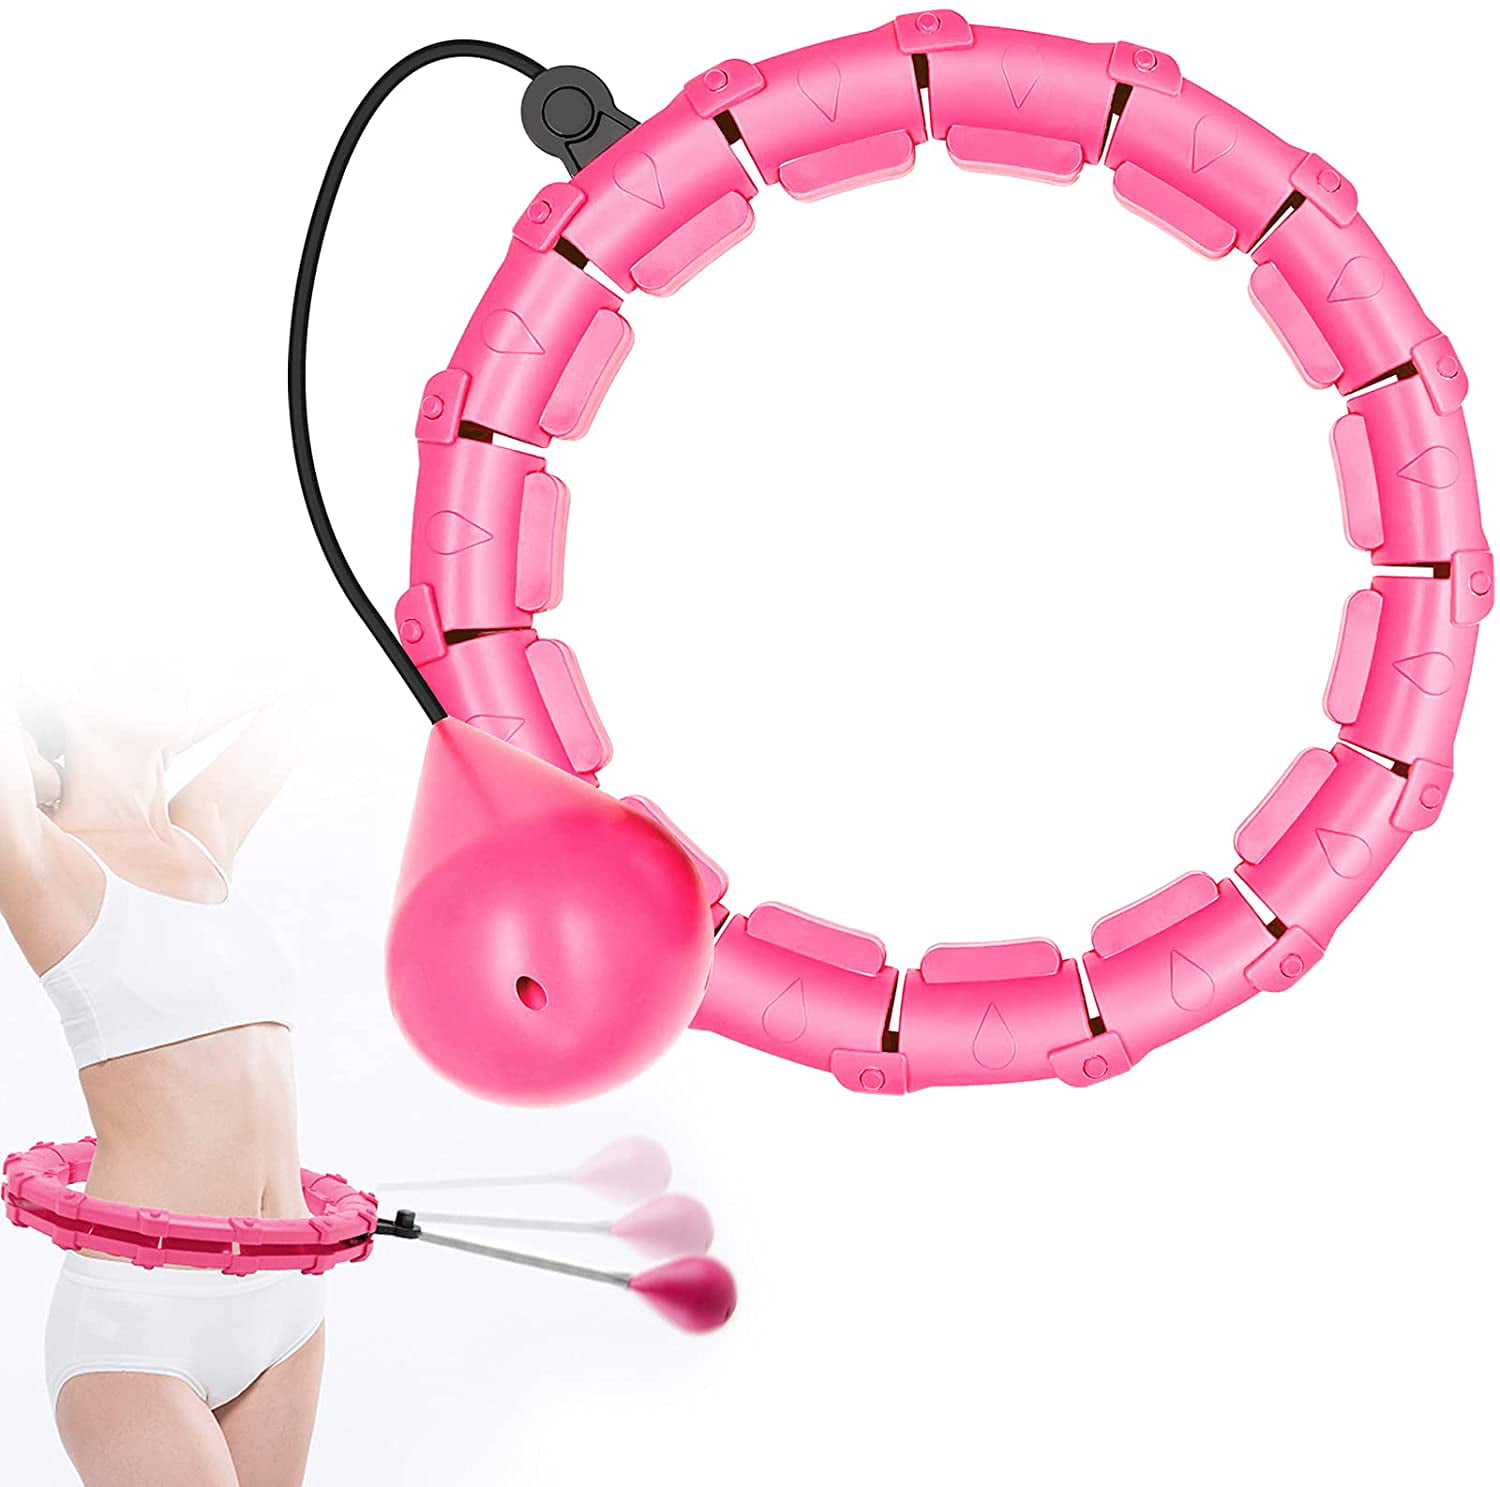 Weighted Smart Hoola Hoops 2 in 1 Abdomen Fitness Massage Hoola Hoops 28 Detachable Knots Adjustable Weight Non-Fall Exercise Hoops for Adults and Kids Weight Loss